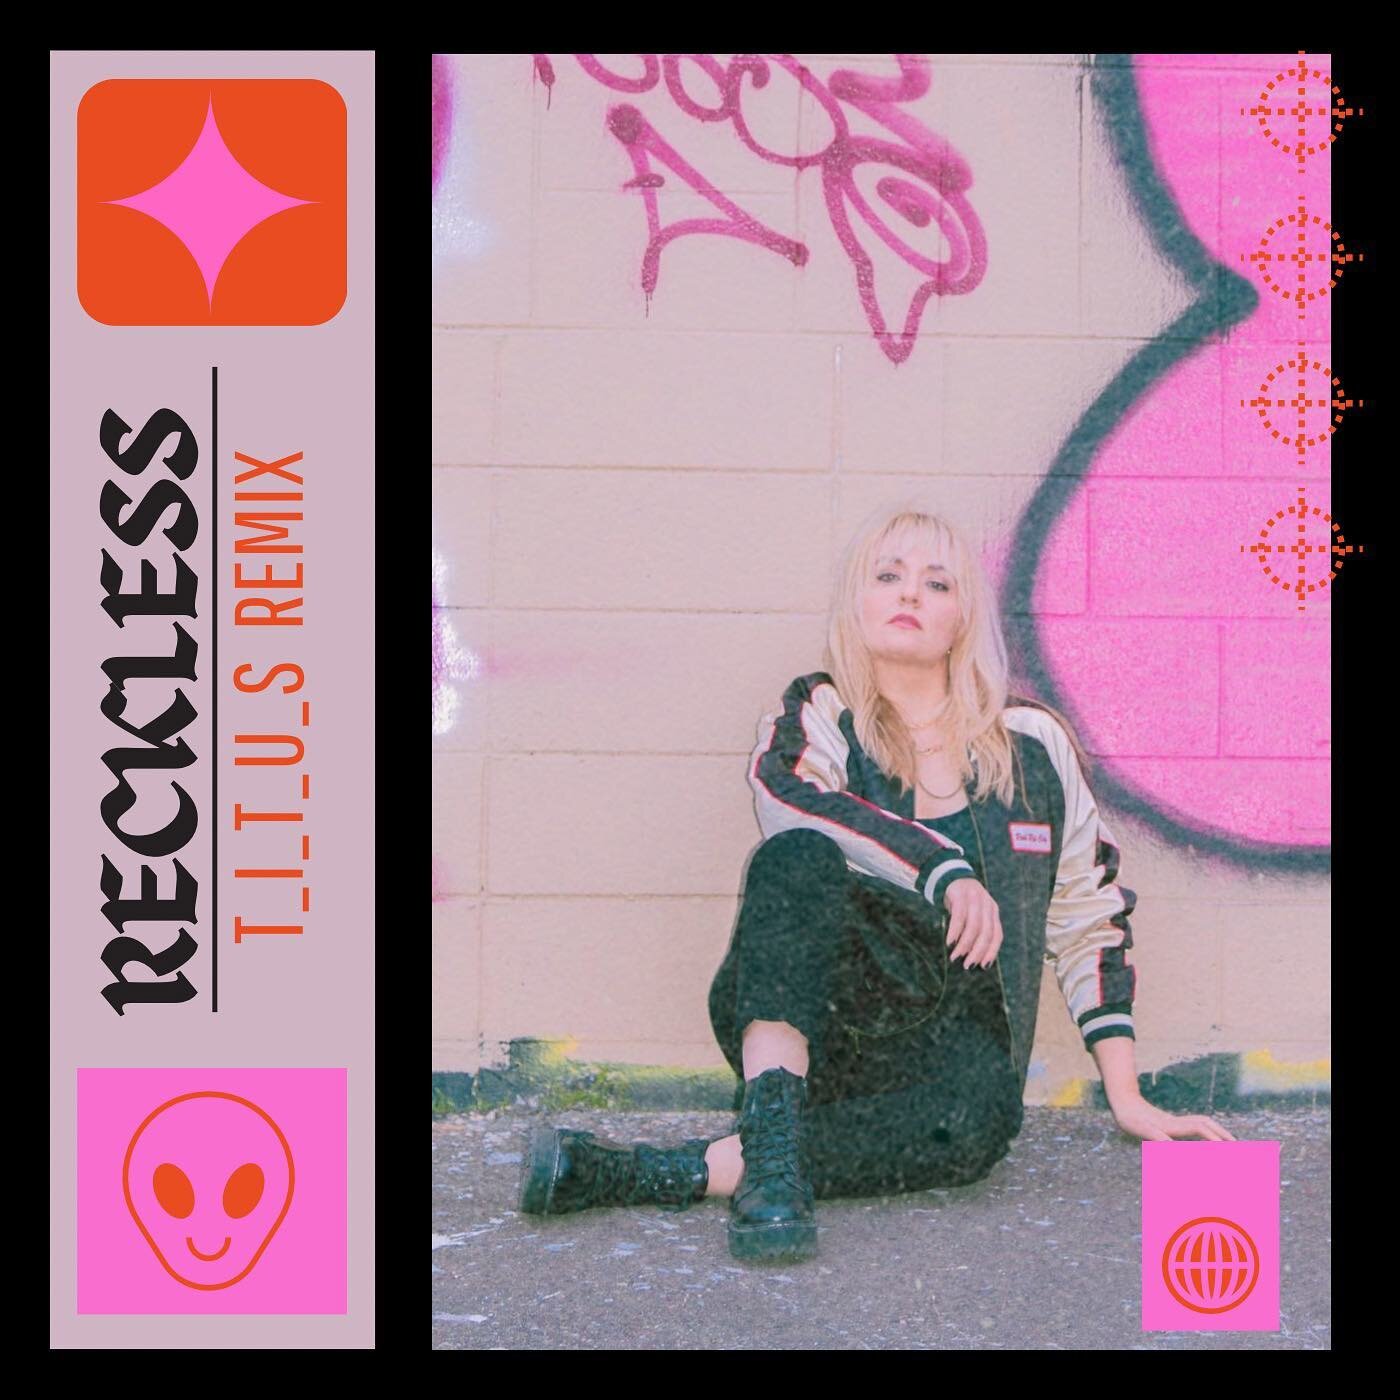 We just dropped a remix of &ldquo;Reckless &rdquo; remixed by Titus @tnagle_music 👻🤍 Titus - u slayed this 🫶 Can&rsquo;t wait for ppl to hear! 🎉 
❤️&mdash; 📸 @pastelcreativestudio